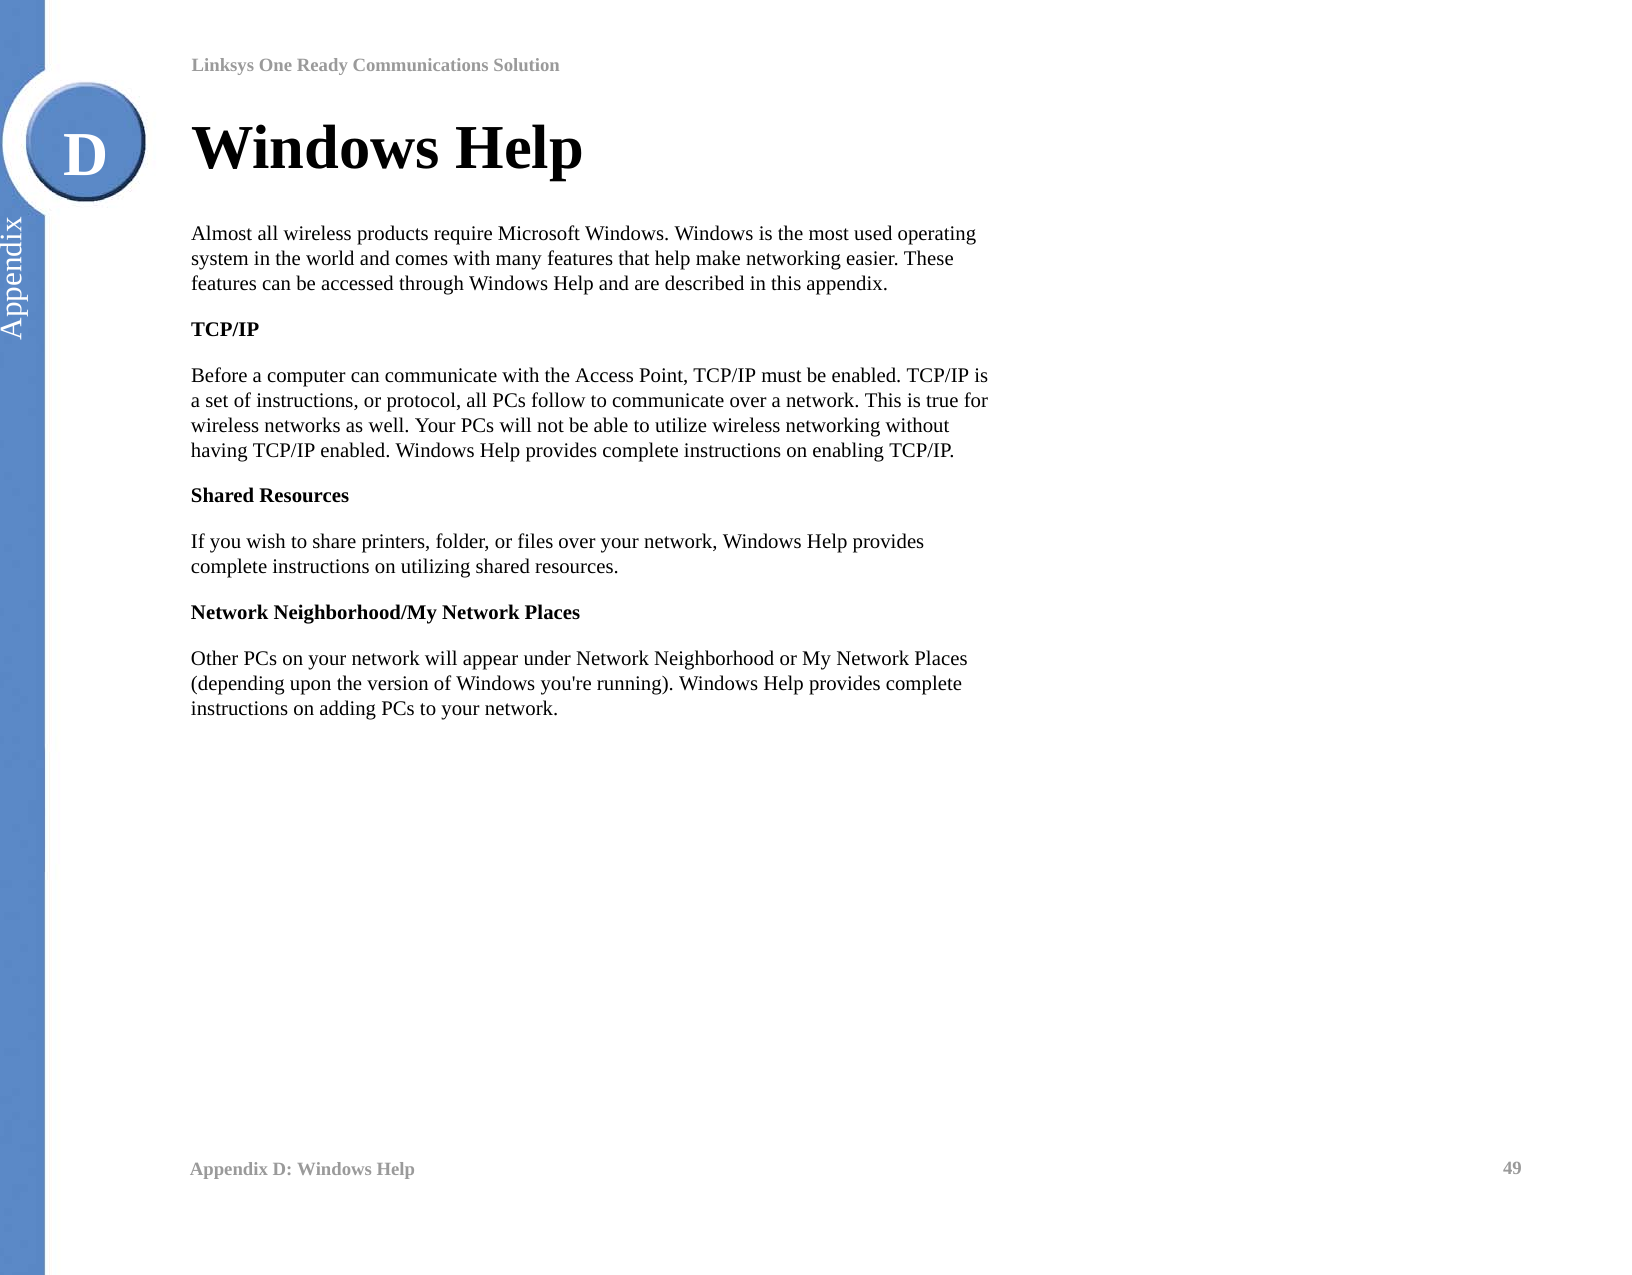 49Appendix D: Windows HelpLinksys One Ready Communications SolutionAppendixDWindows HelpAlmost all wireless products require Microsoft Windows. Windows is the most used operating system in the world and comes with many features that help make networking easier. These features can be accessed through Windows Help and are described in this appendix.TCP/IPBefore a computer can communicate with the Access Point, TCP/IP must be enabled. TCP/IP is a set of instructions, or protocol, all PCs follow to communicate over a network. This is true for wireless networks as well. Your PCs will not be able to utilize wireless networking without having TCP/IP enabled. Windows Help provides complete instructions on enabling TCP/IP.Shared ResourcesIf you wish to share printers, folder, or files over your network, Windows Help provides complete instructions on utilizing shared resources.Network Neighborhood/My Network PlacesOther PCs on your network will appear under Network Neighborhood or My Network Places (depending upon the version of Windows you&apos;re running). Windows Help provides complete instructions on adding PCs to your network.